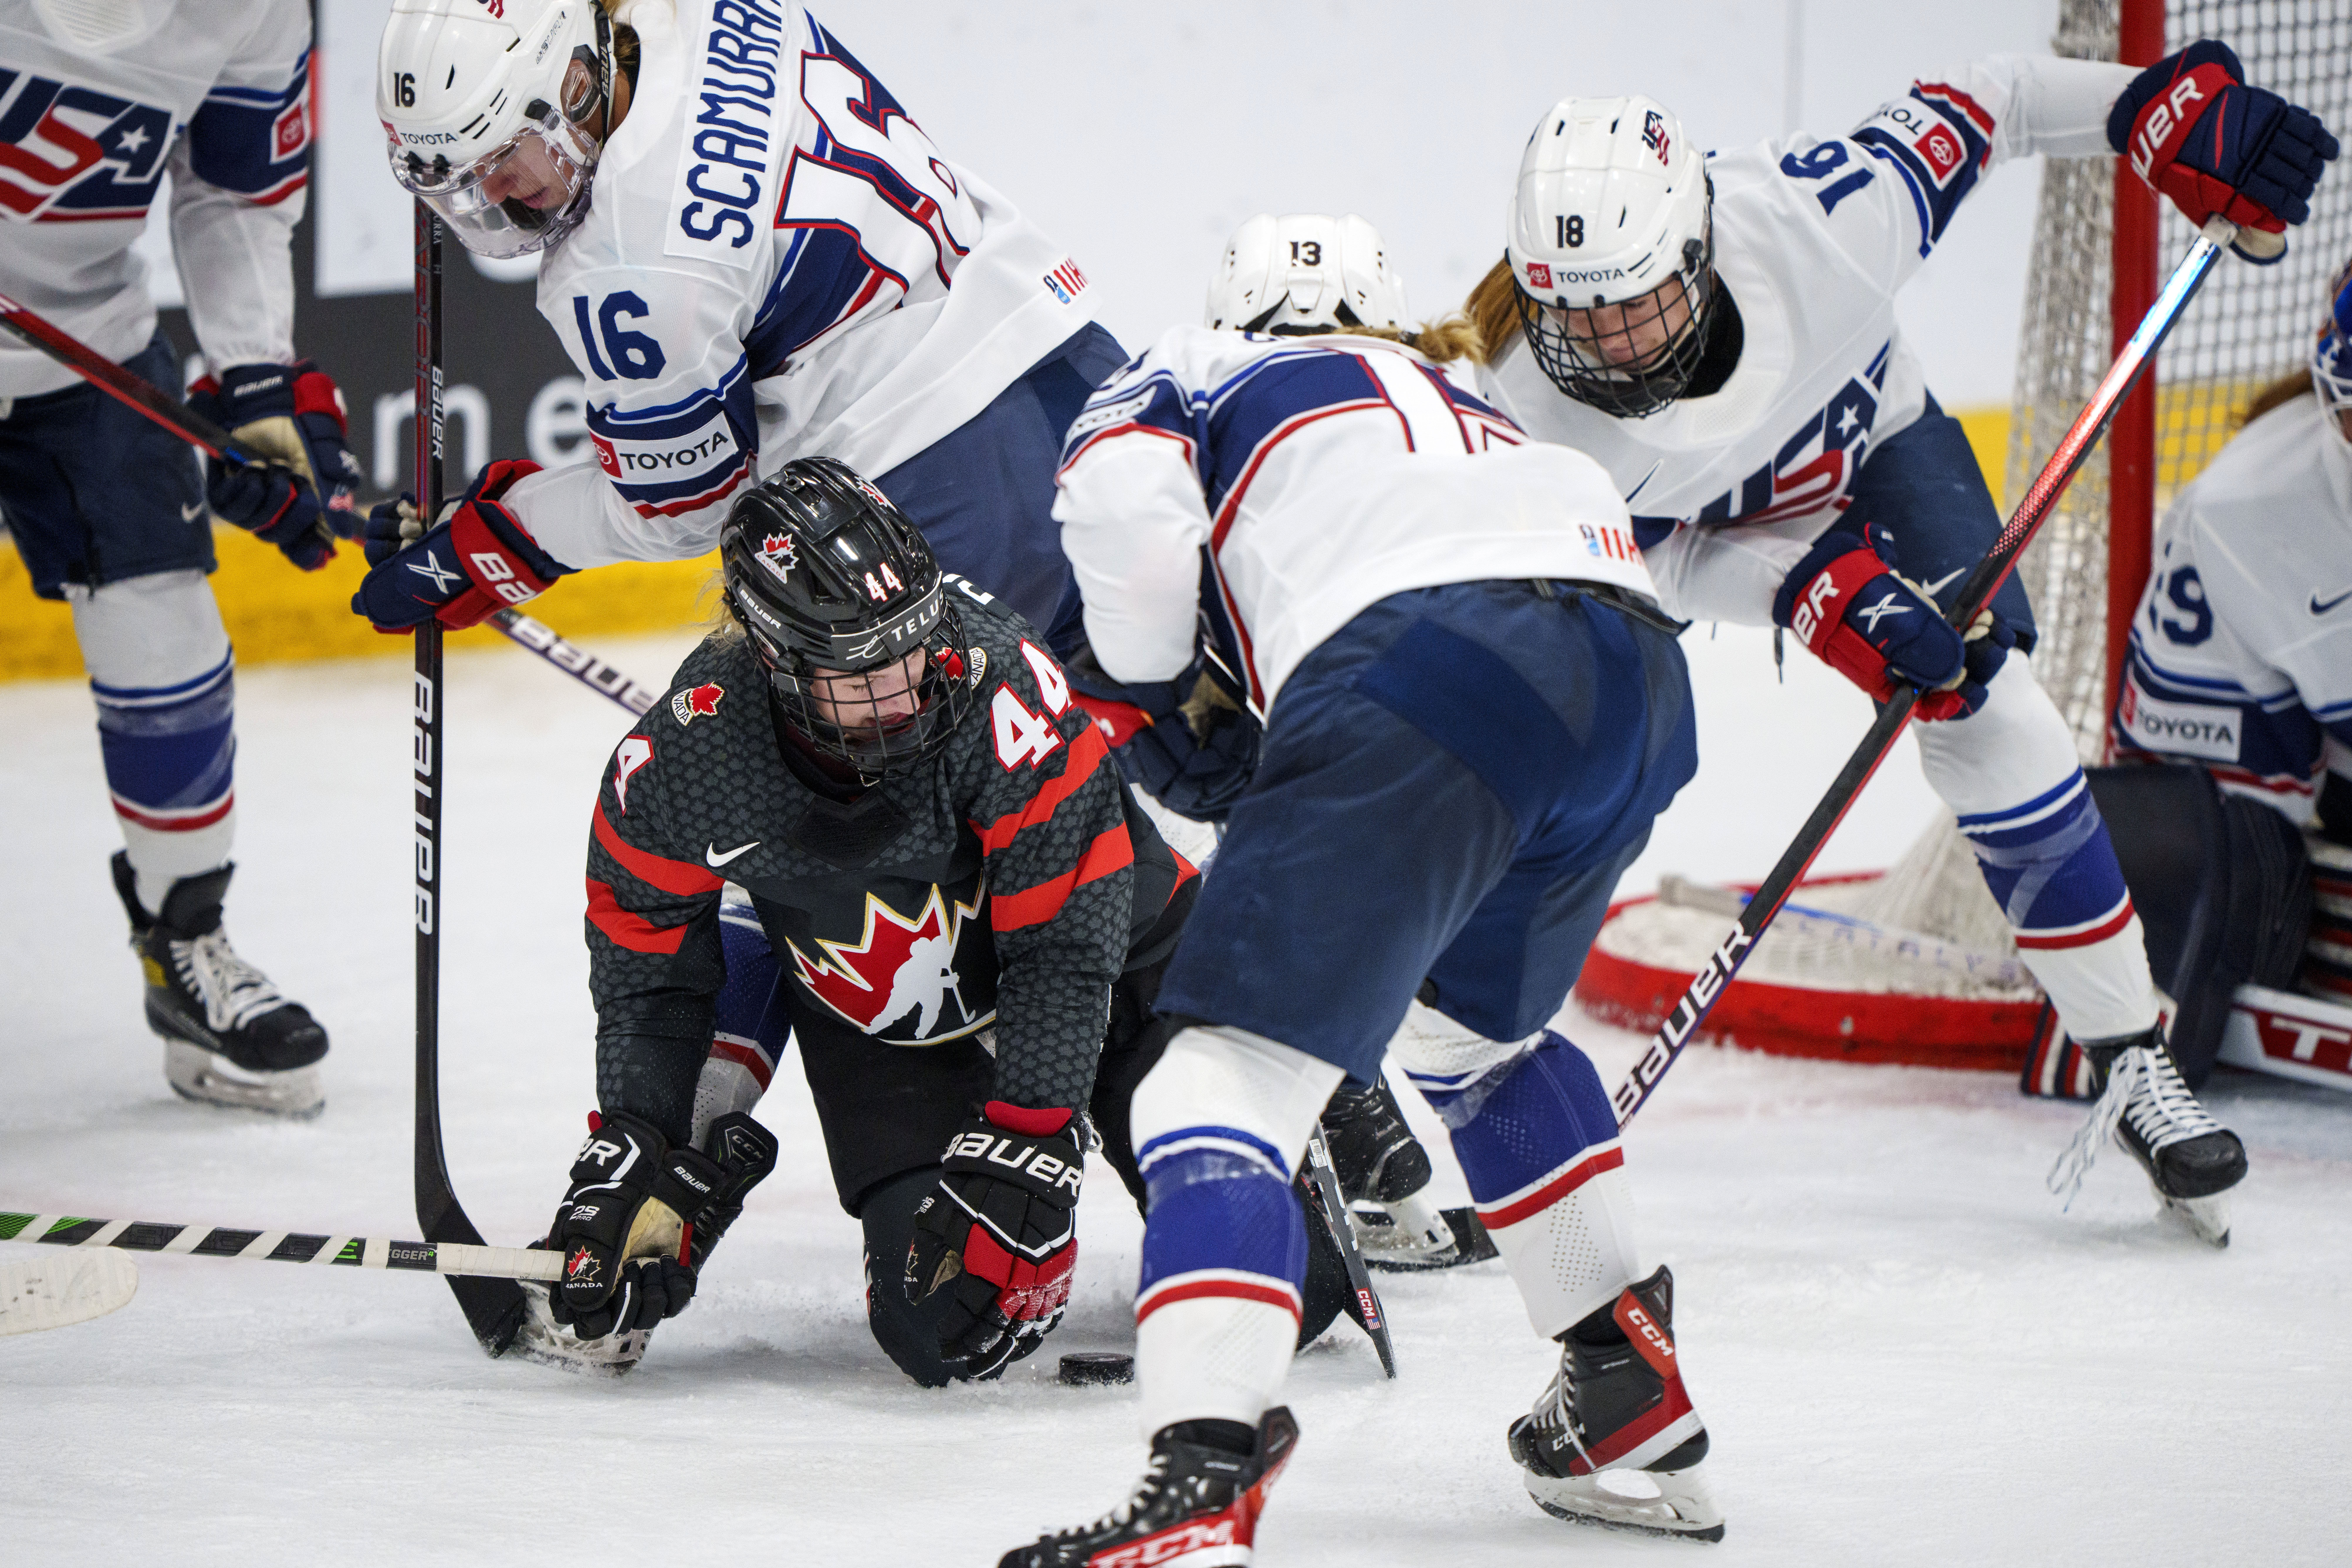 How to Watch the IIHF Womens World Championship Gold Medal Game - USA vs